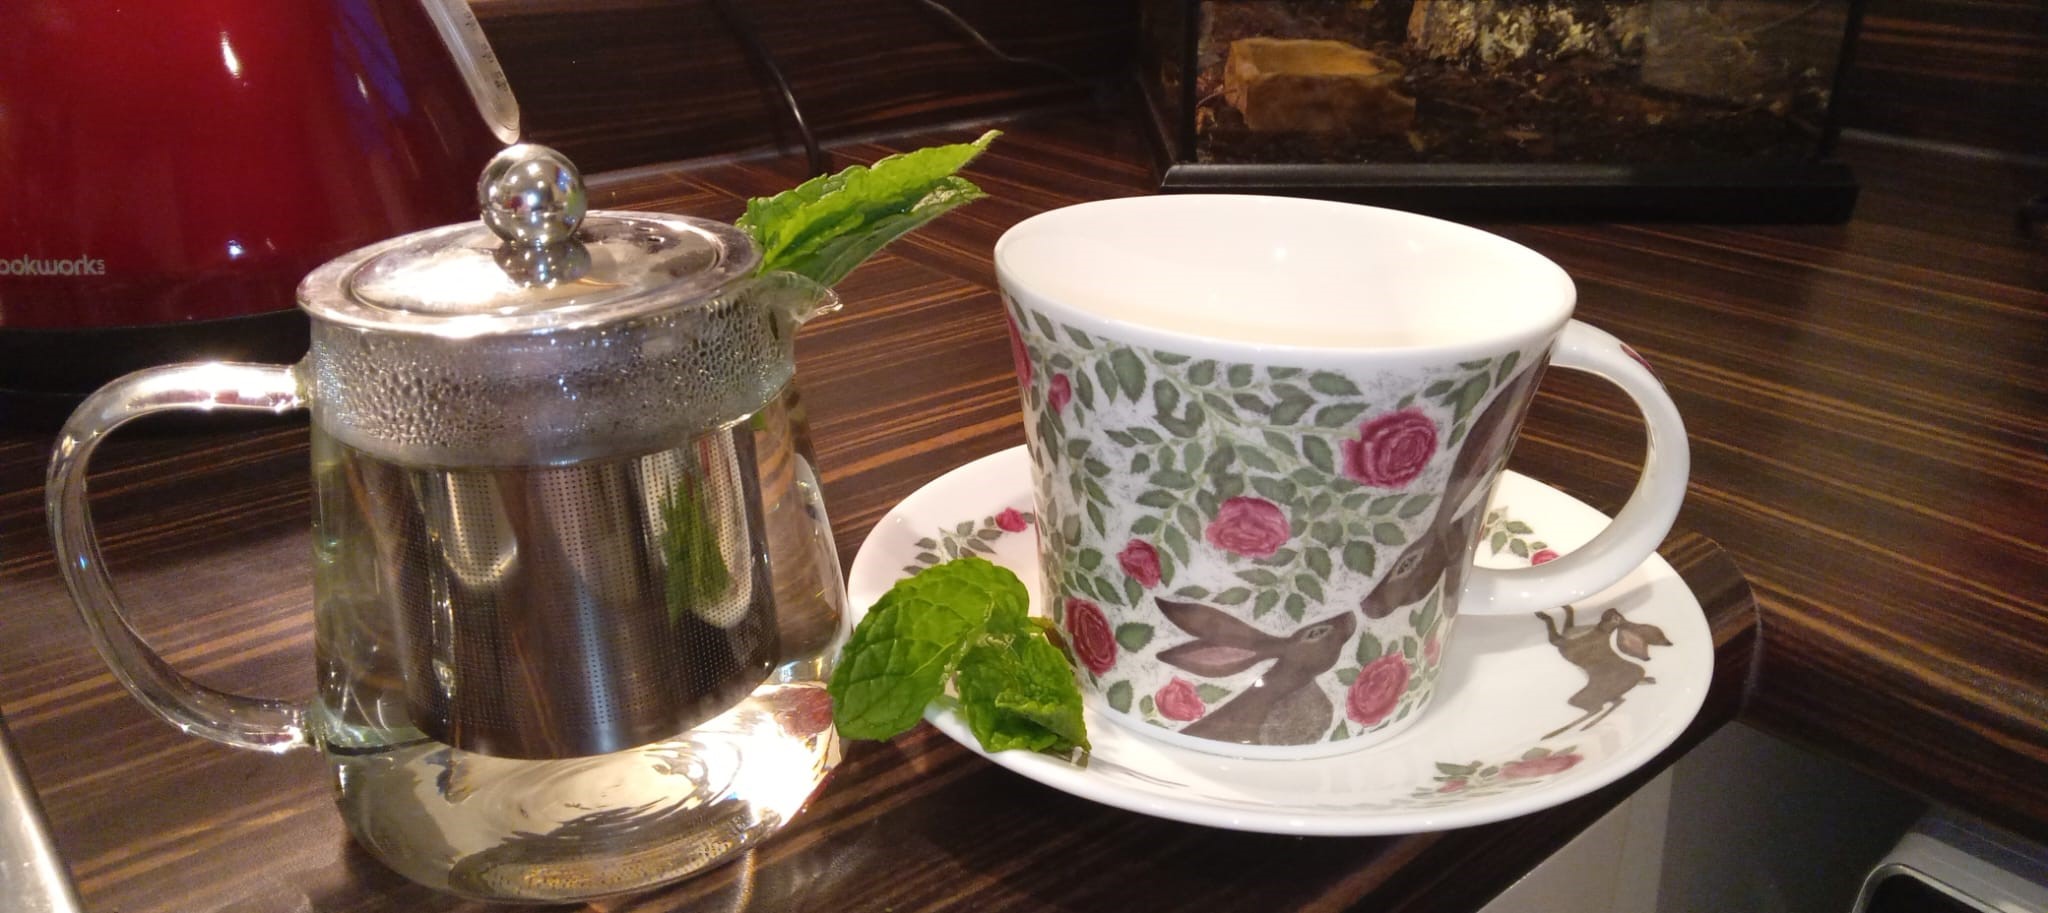 Image shows spearmint tea in herbal tea pot with cup and saucer